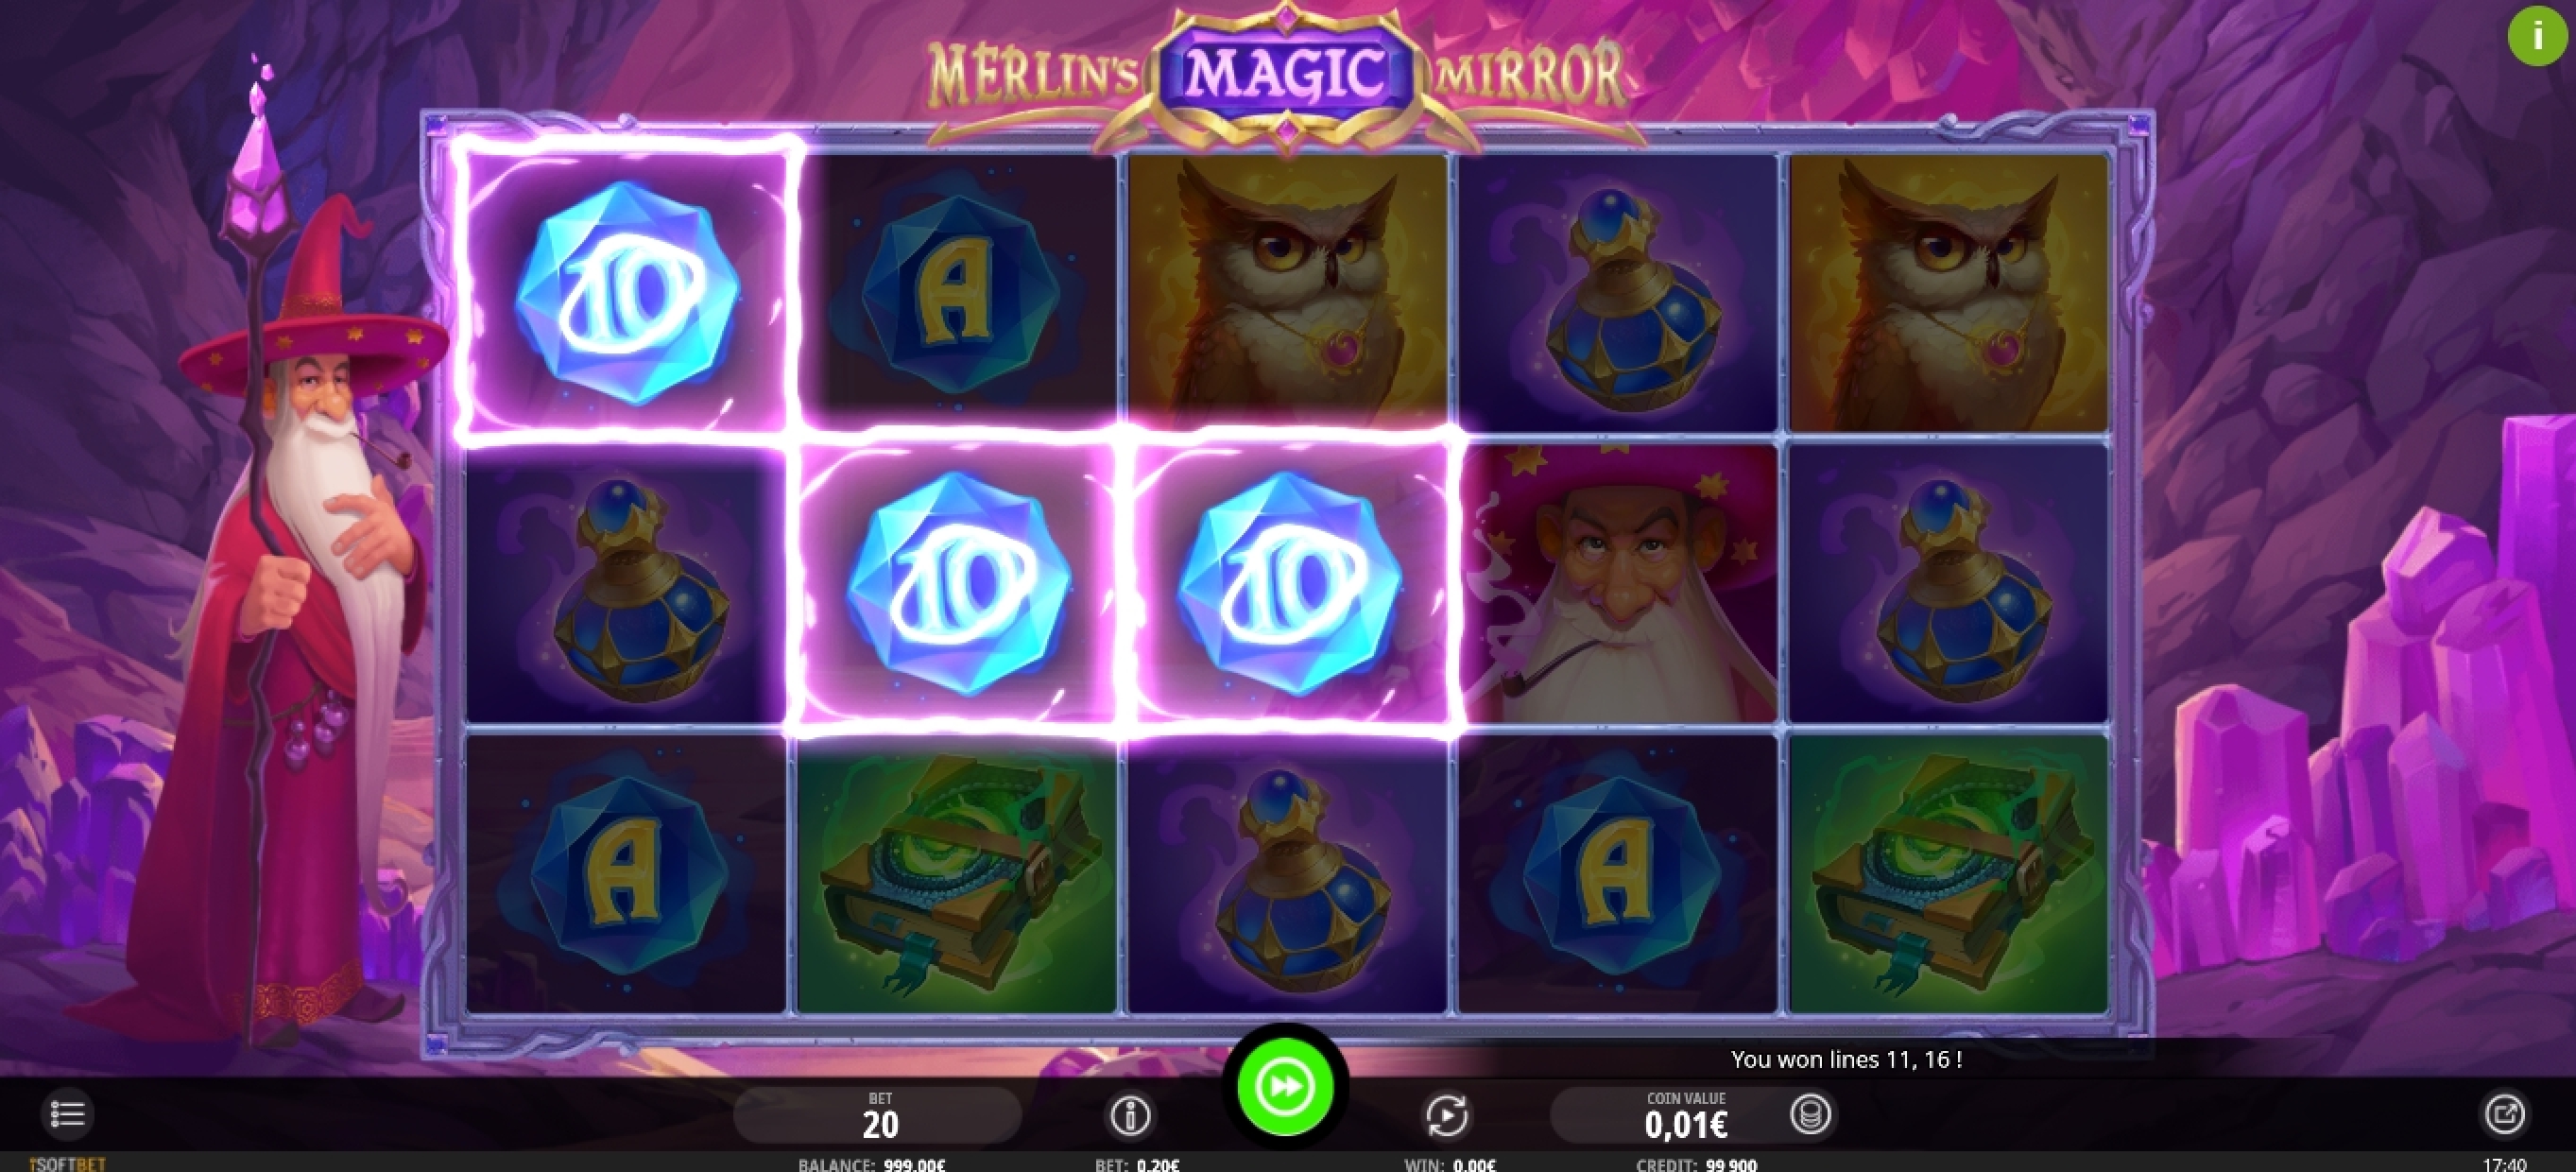 Win Money in Merlin's Magic Mirror Free Slot Game by iSoftBet